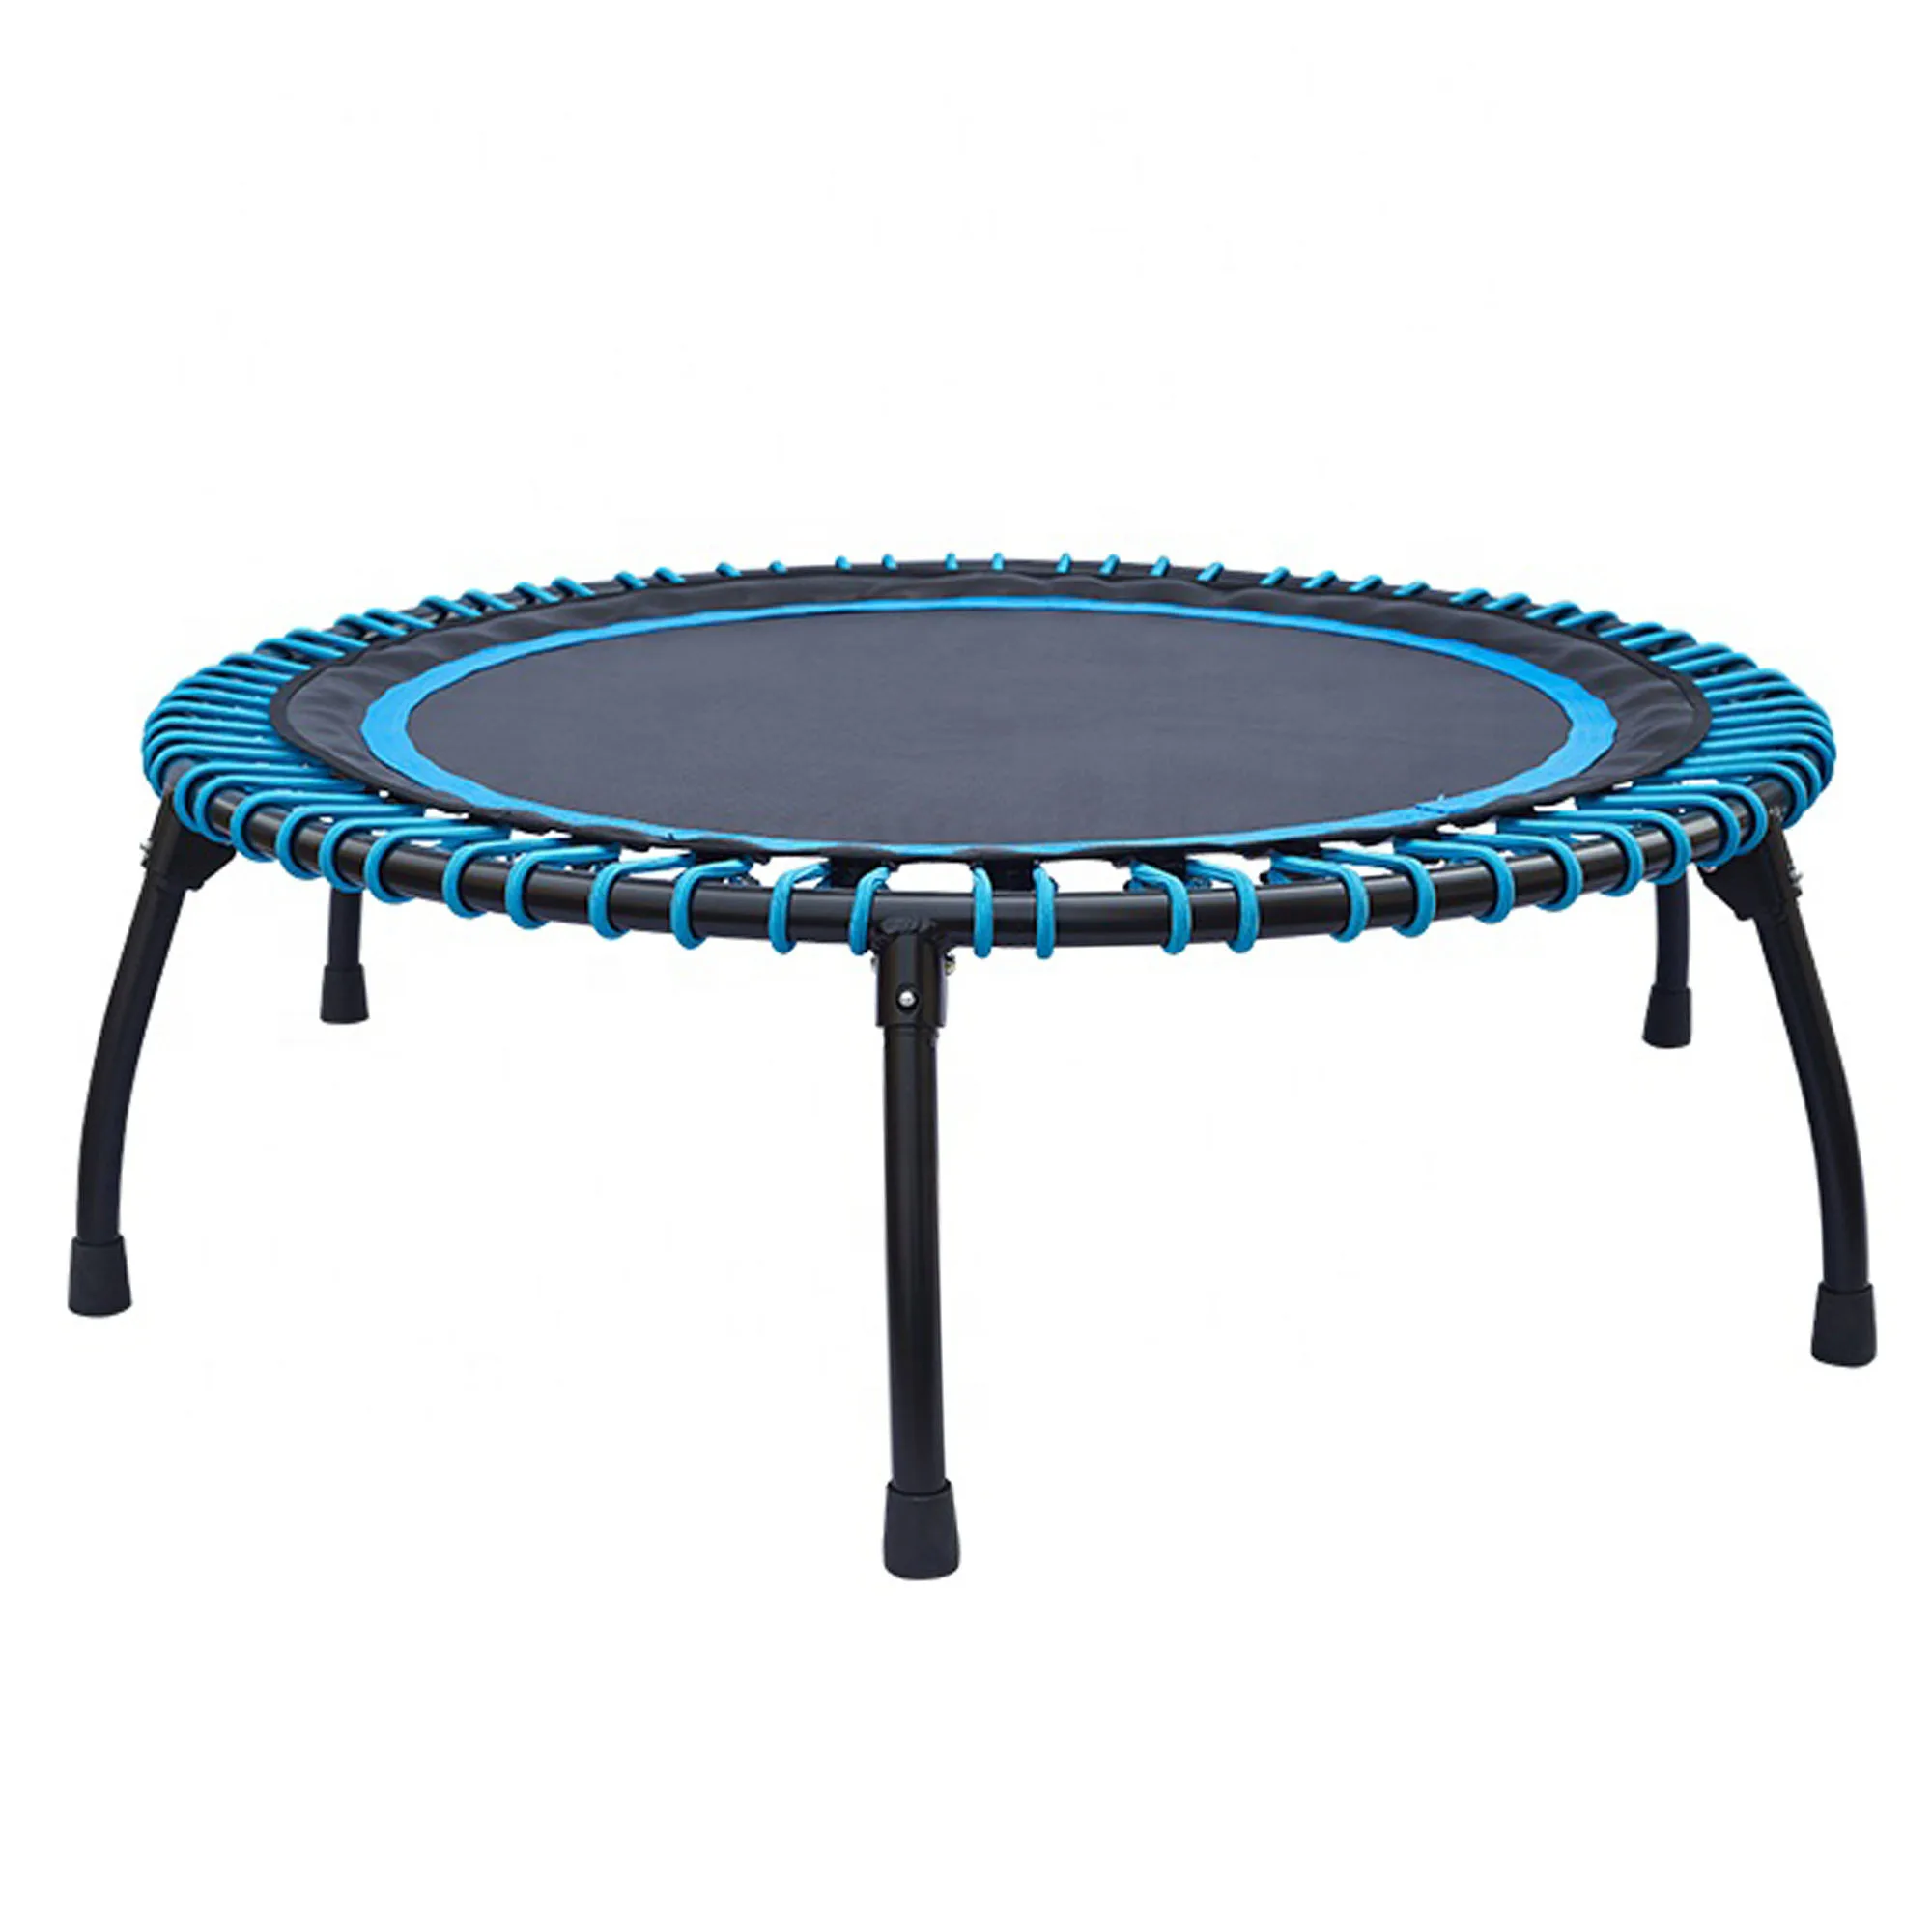 antes de emoción embarazada 40'' Foldable Fitness Trampolines On Sale Cheap Trampolines Prices Bungee  Trampoline - Buy Trampoline Deals,Trampoline Prices,Round Trampoline With  Tent/roof Product on Alibaba.com